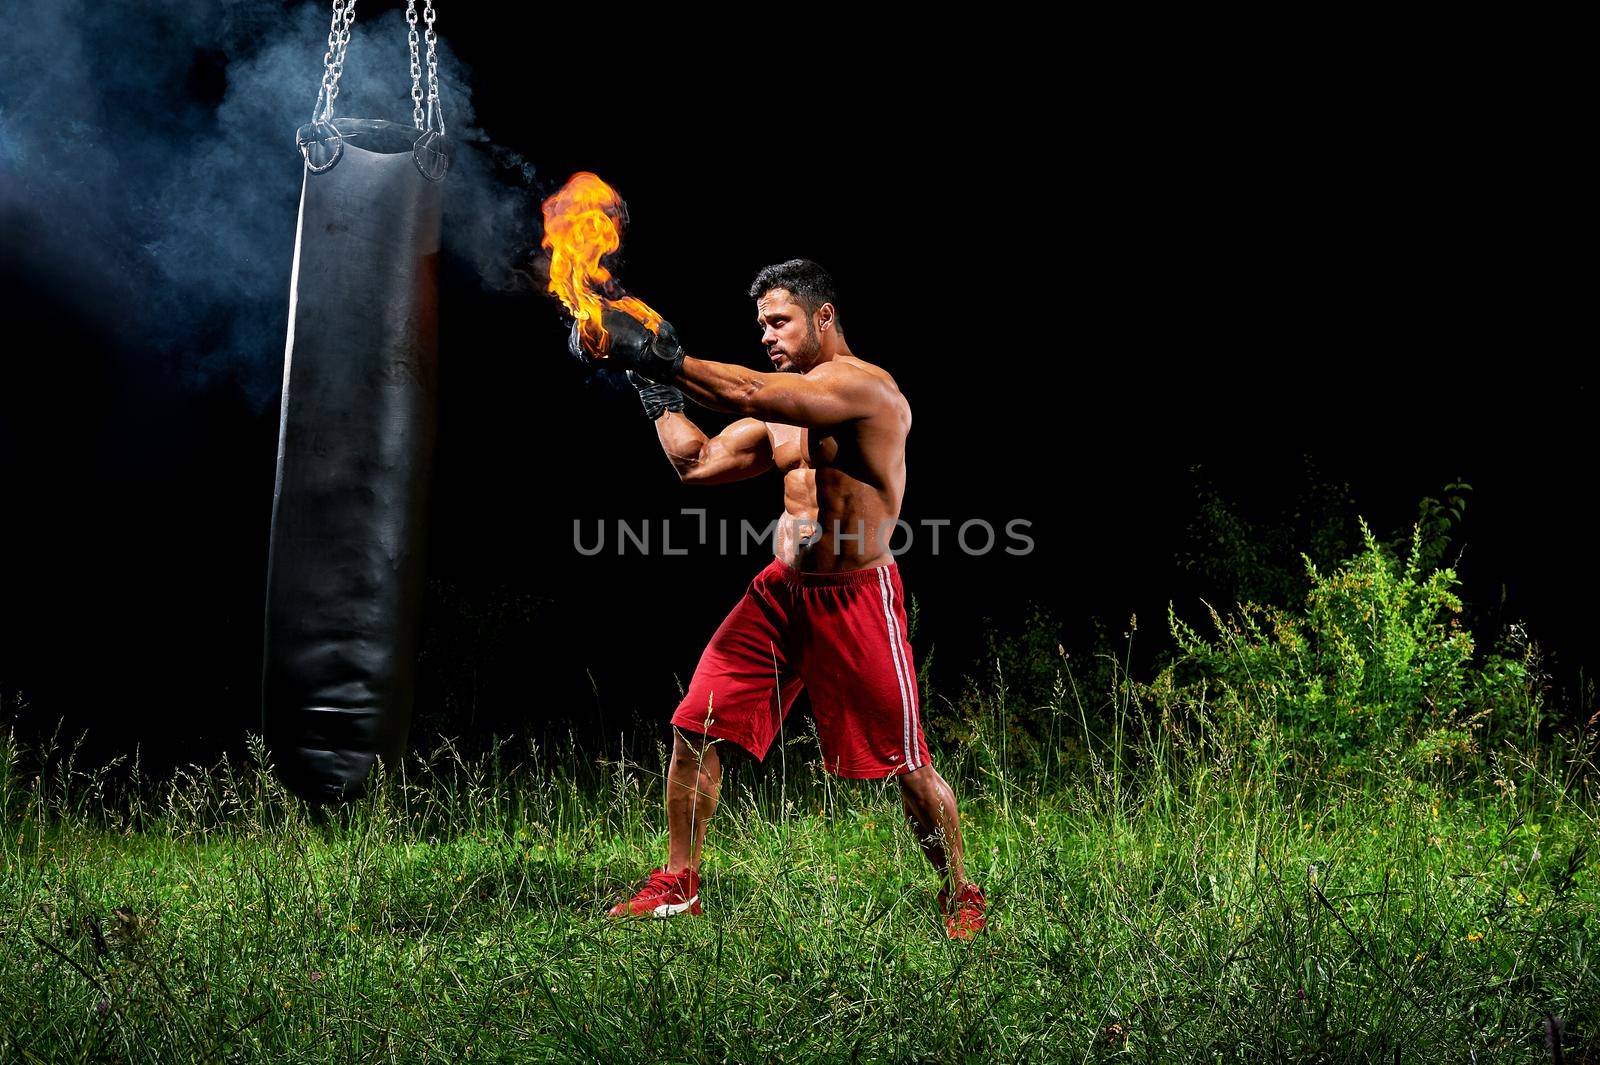 Sport motivation achievement concept. Professional male boxer training on a punching bag outdoors at night wearing burning boxing gloves. Professional martial arts fighter working out on punching bag